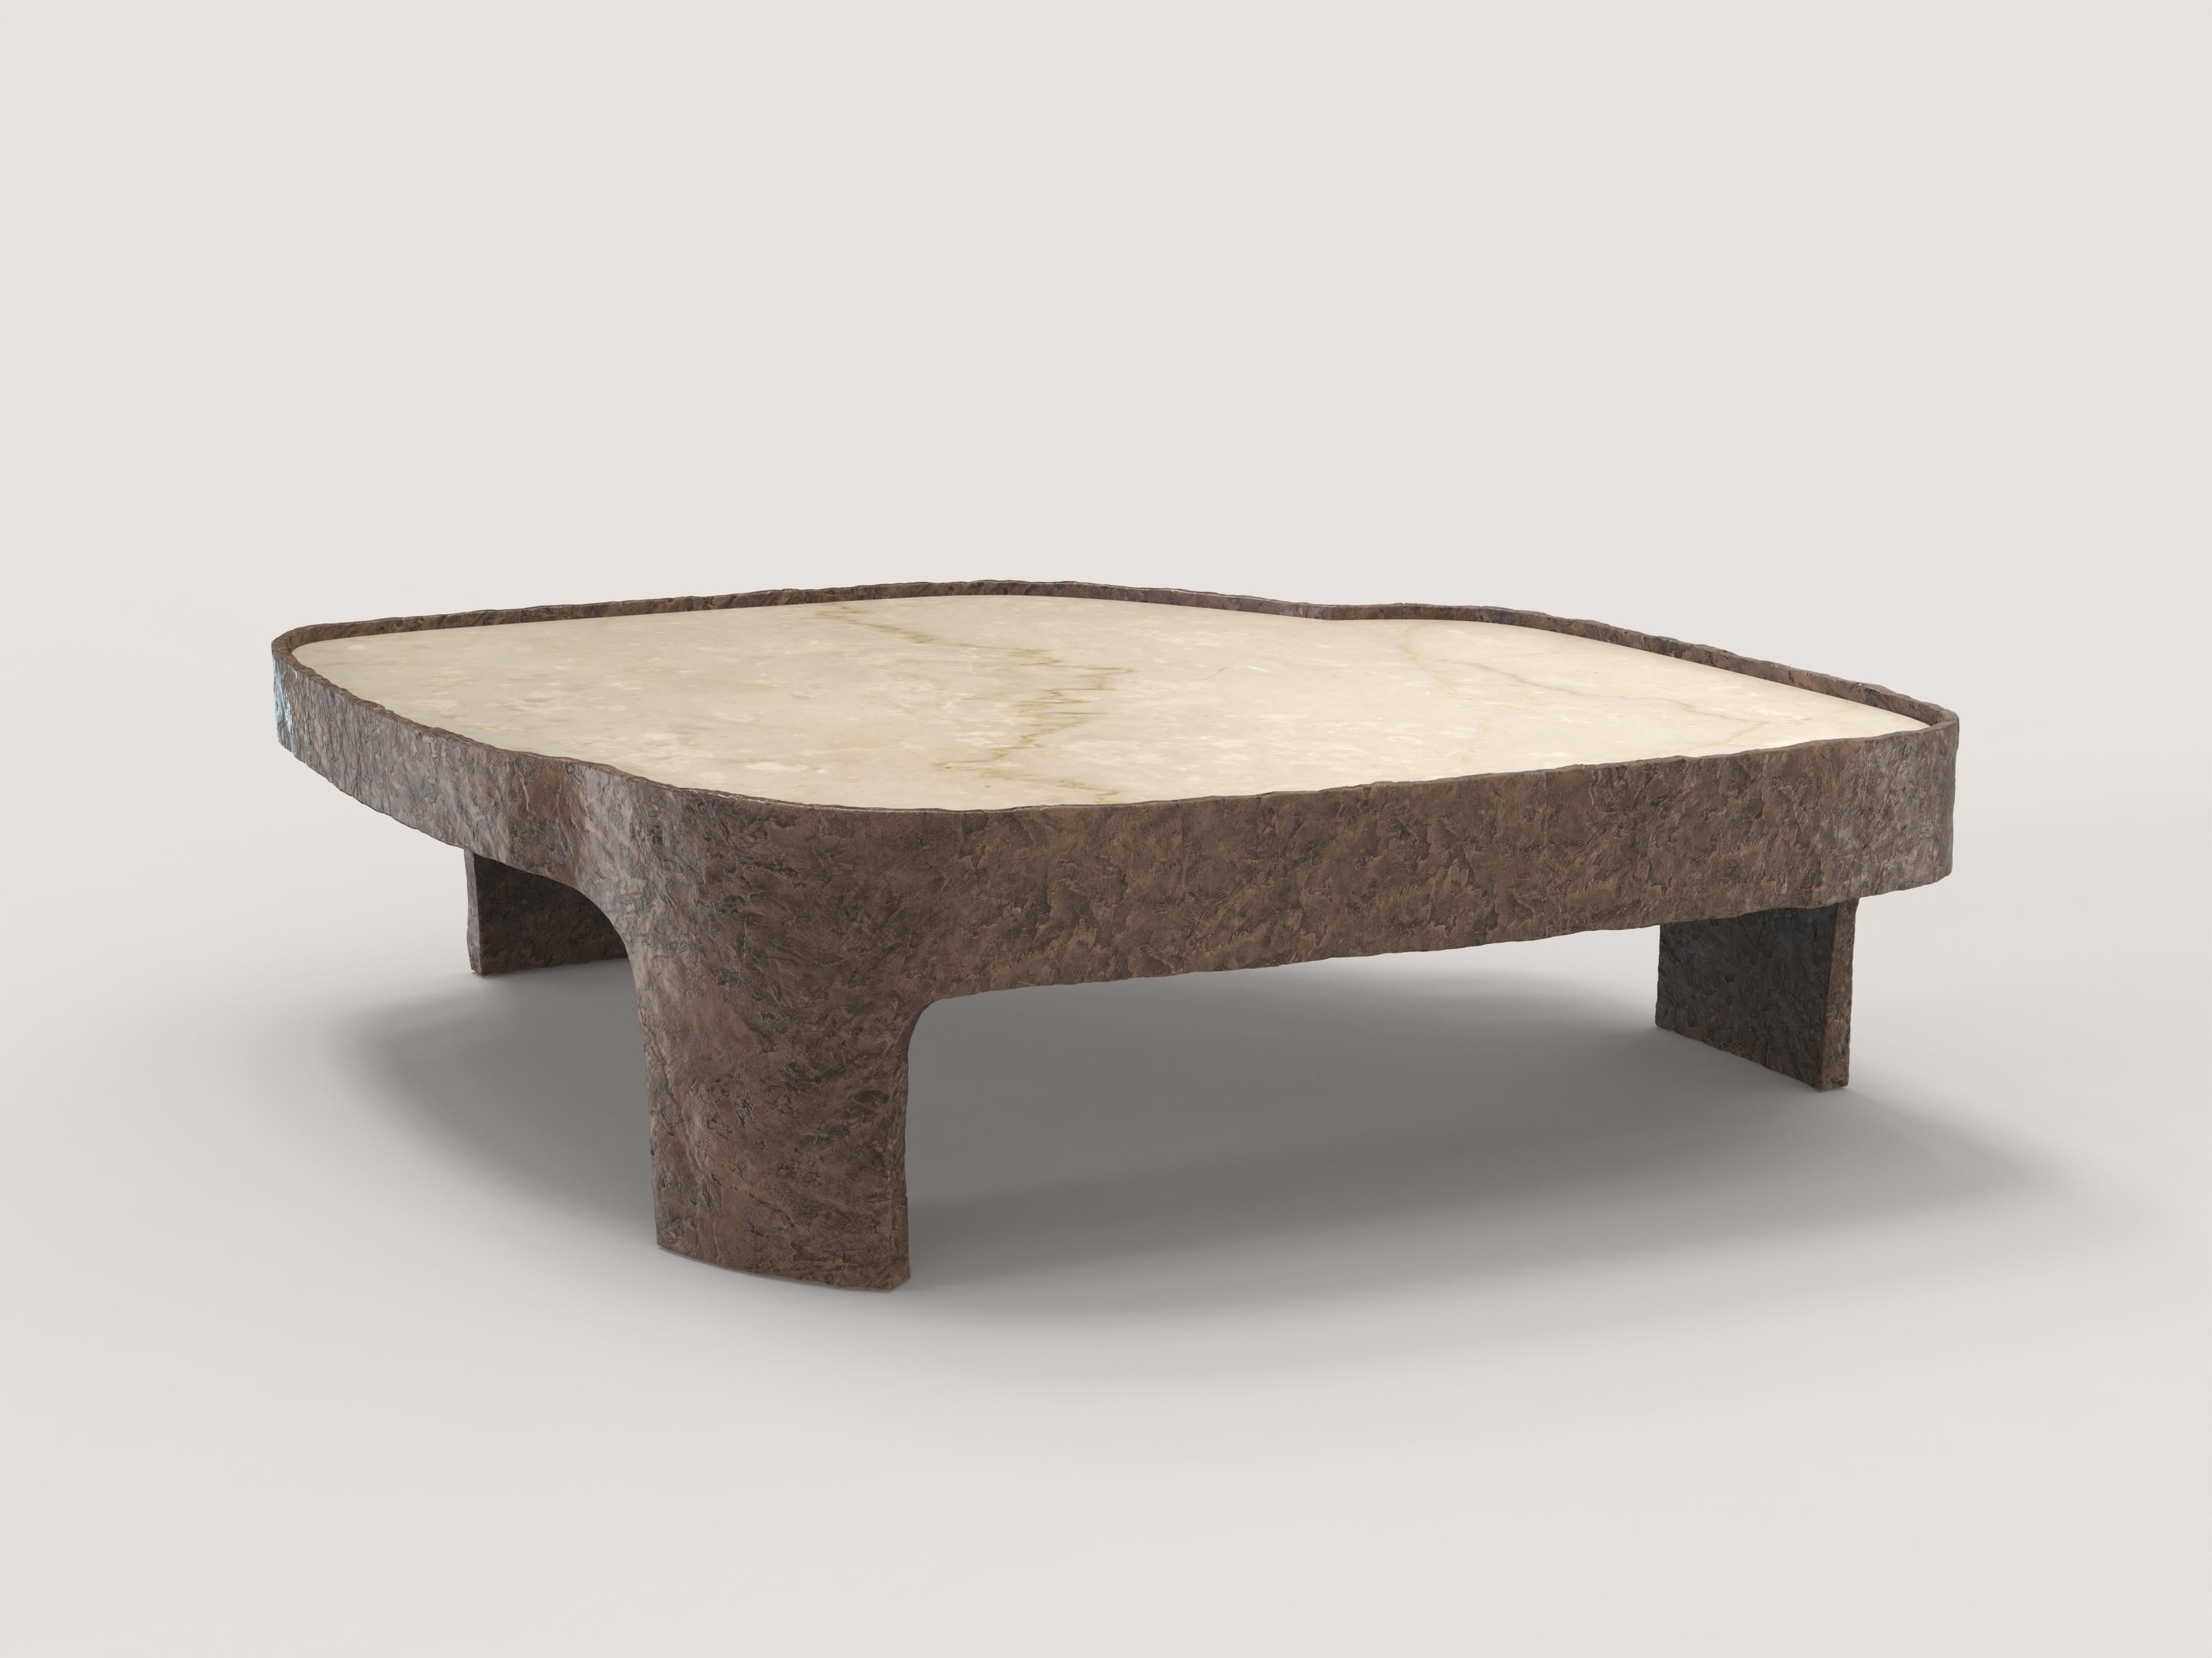 Limited Edition Marble Bronze Table, Sumatra V2 by Edizione Limitata In New Condition For Sale In Milano, IT